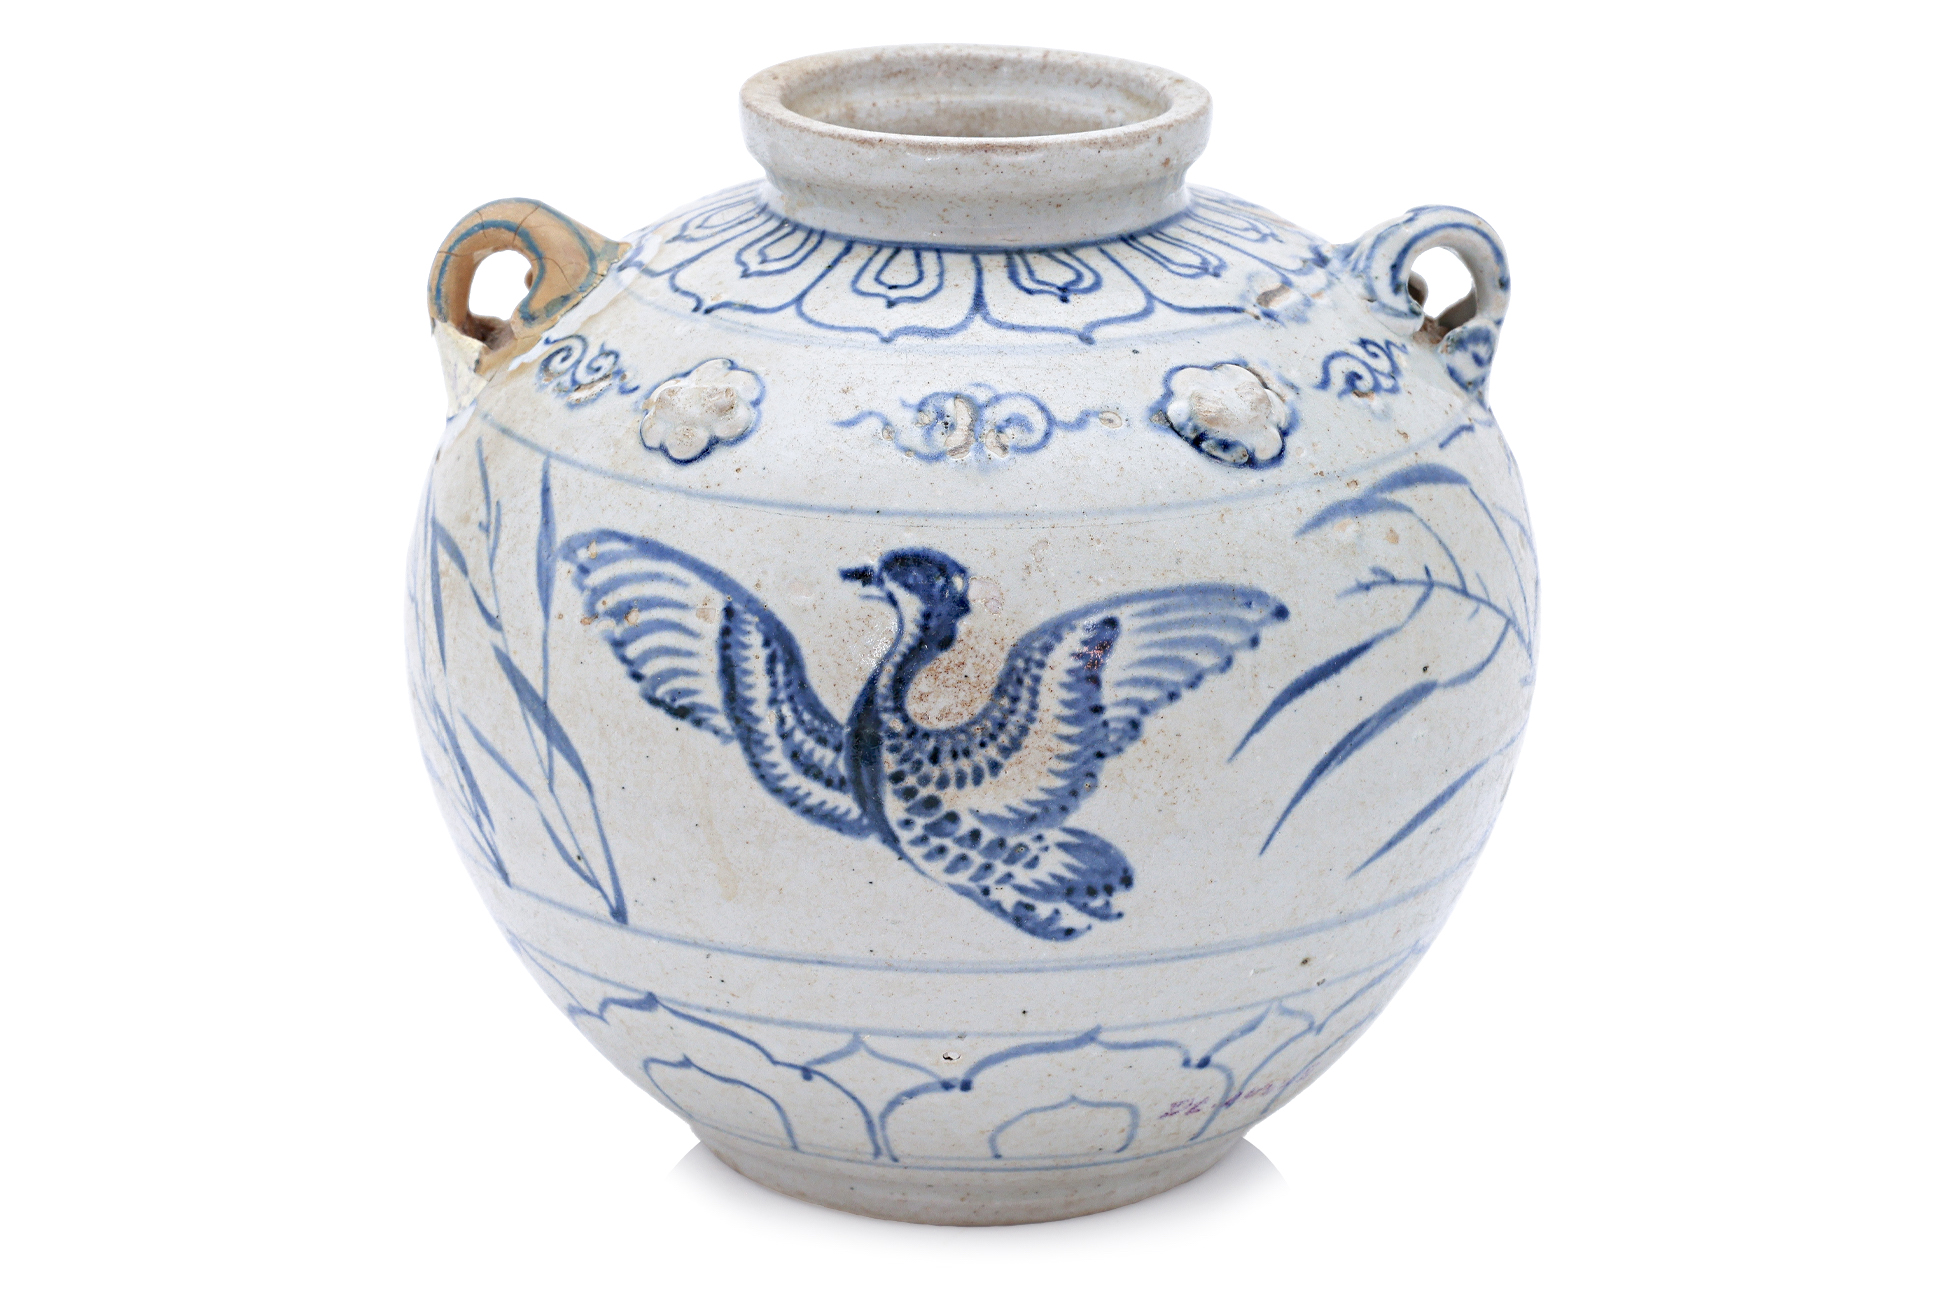 A VIETNAMESE BLUE AND WHITE JAR DECORATED WITH FLYING GEESE